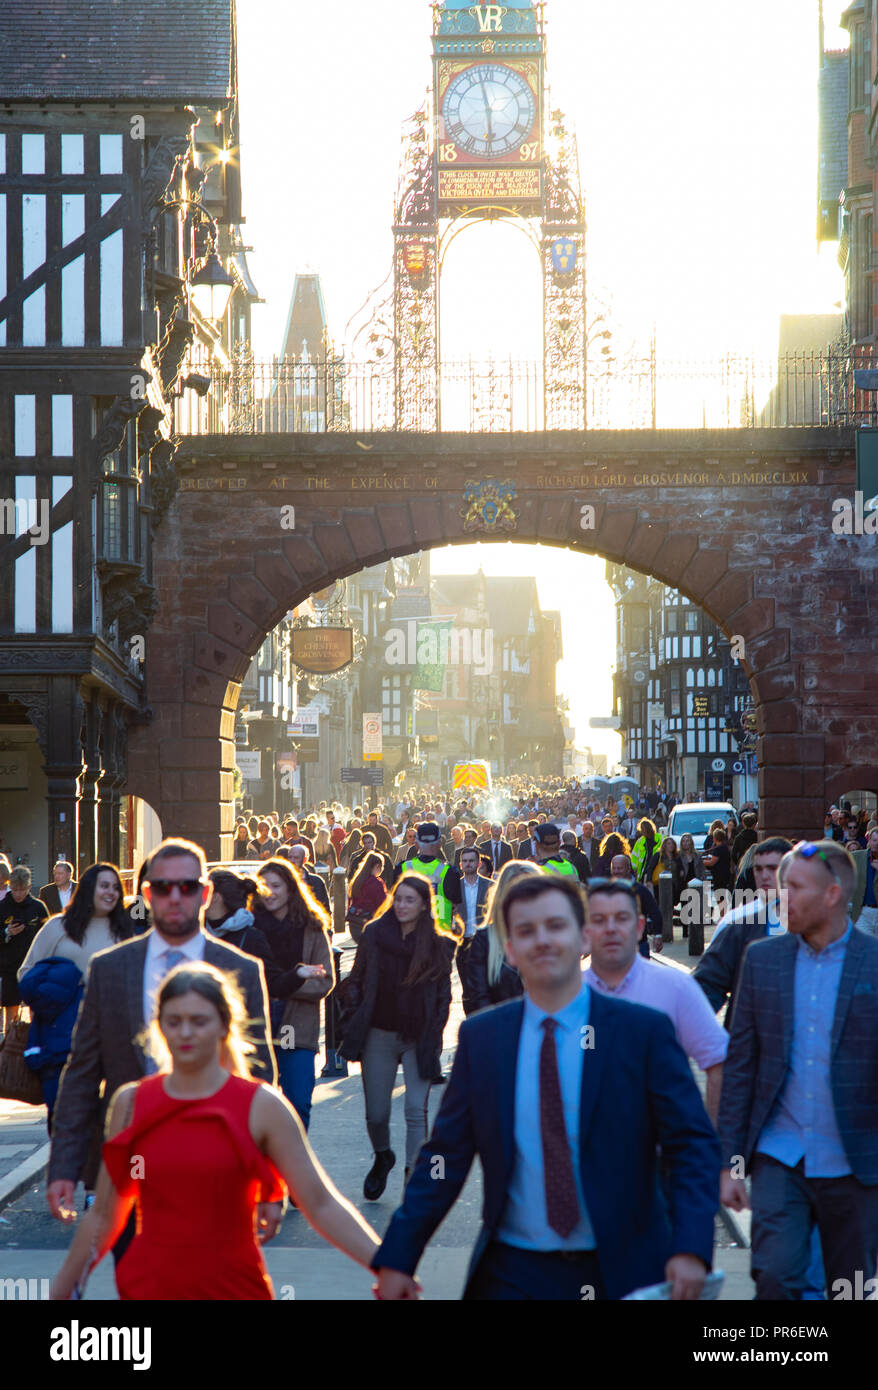 A busy Eastgate street in Chester on Race day. Image taken in September 2018. Stock Photo